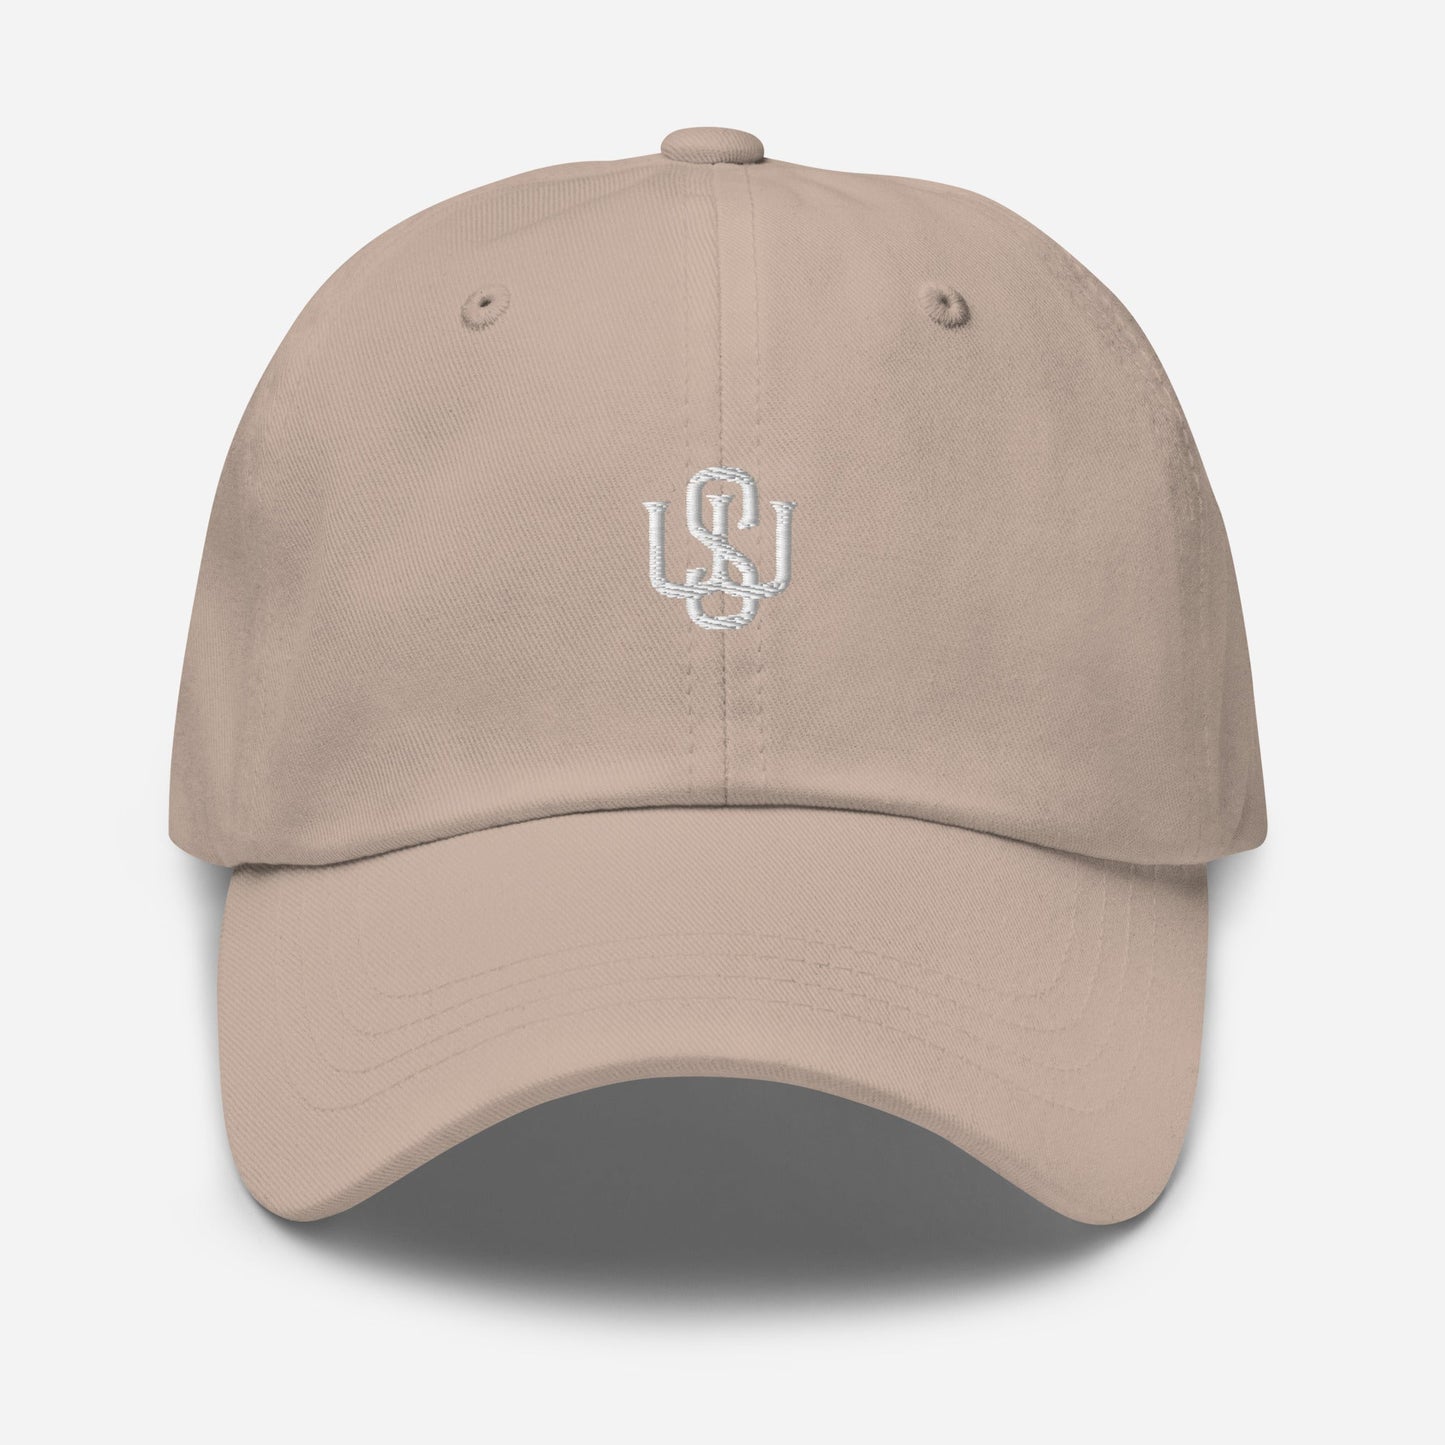 WS Embroidery hat - Wet Sundays